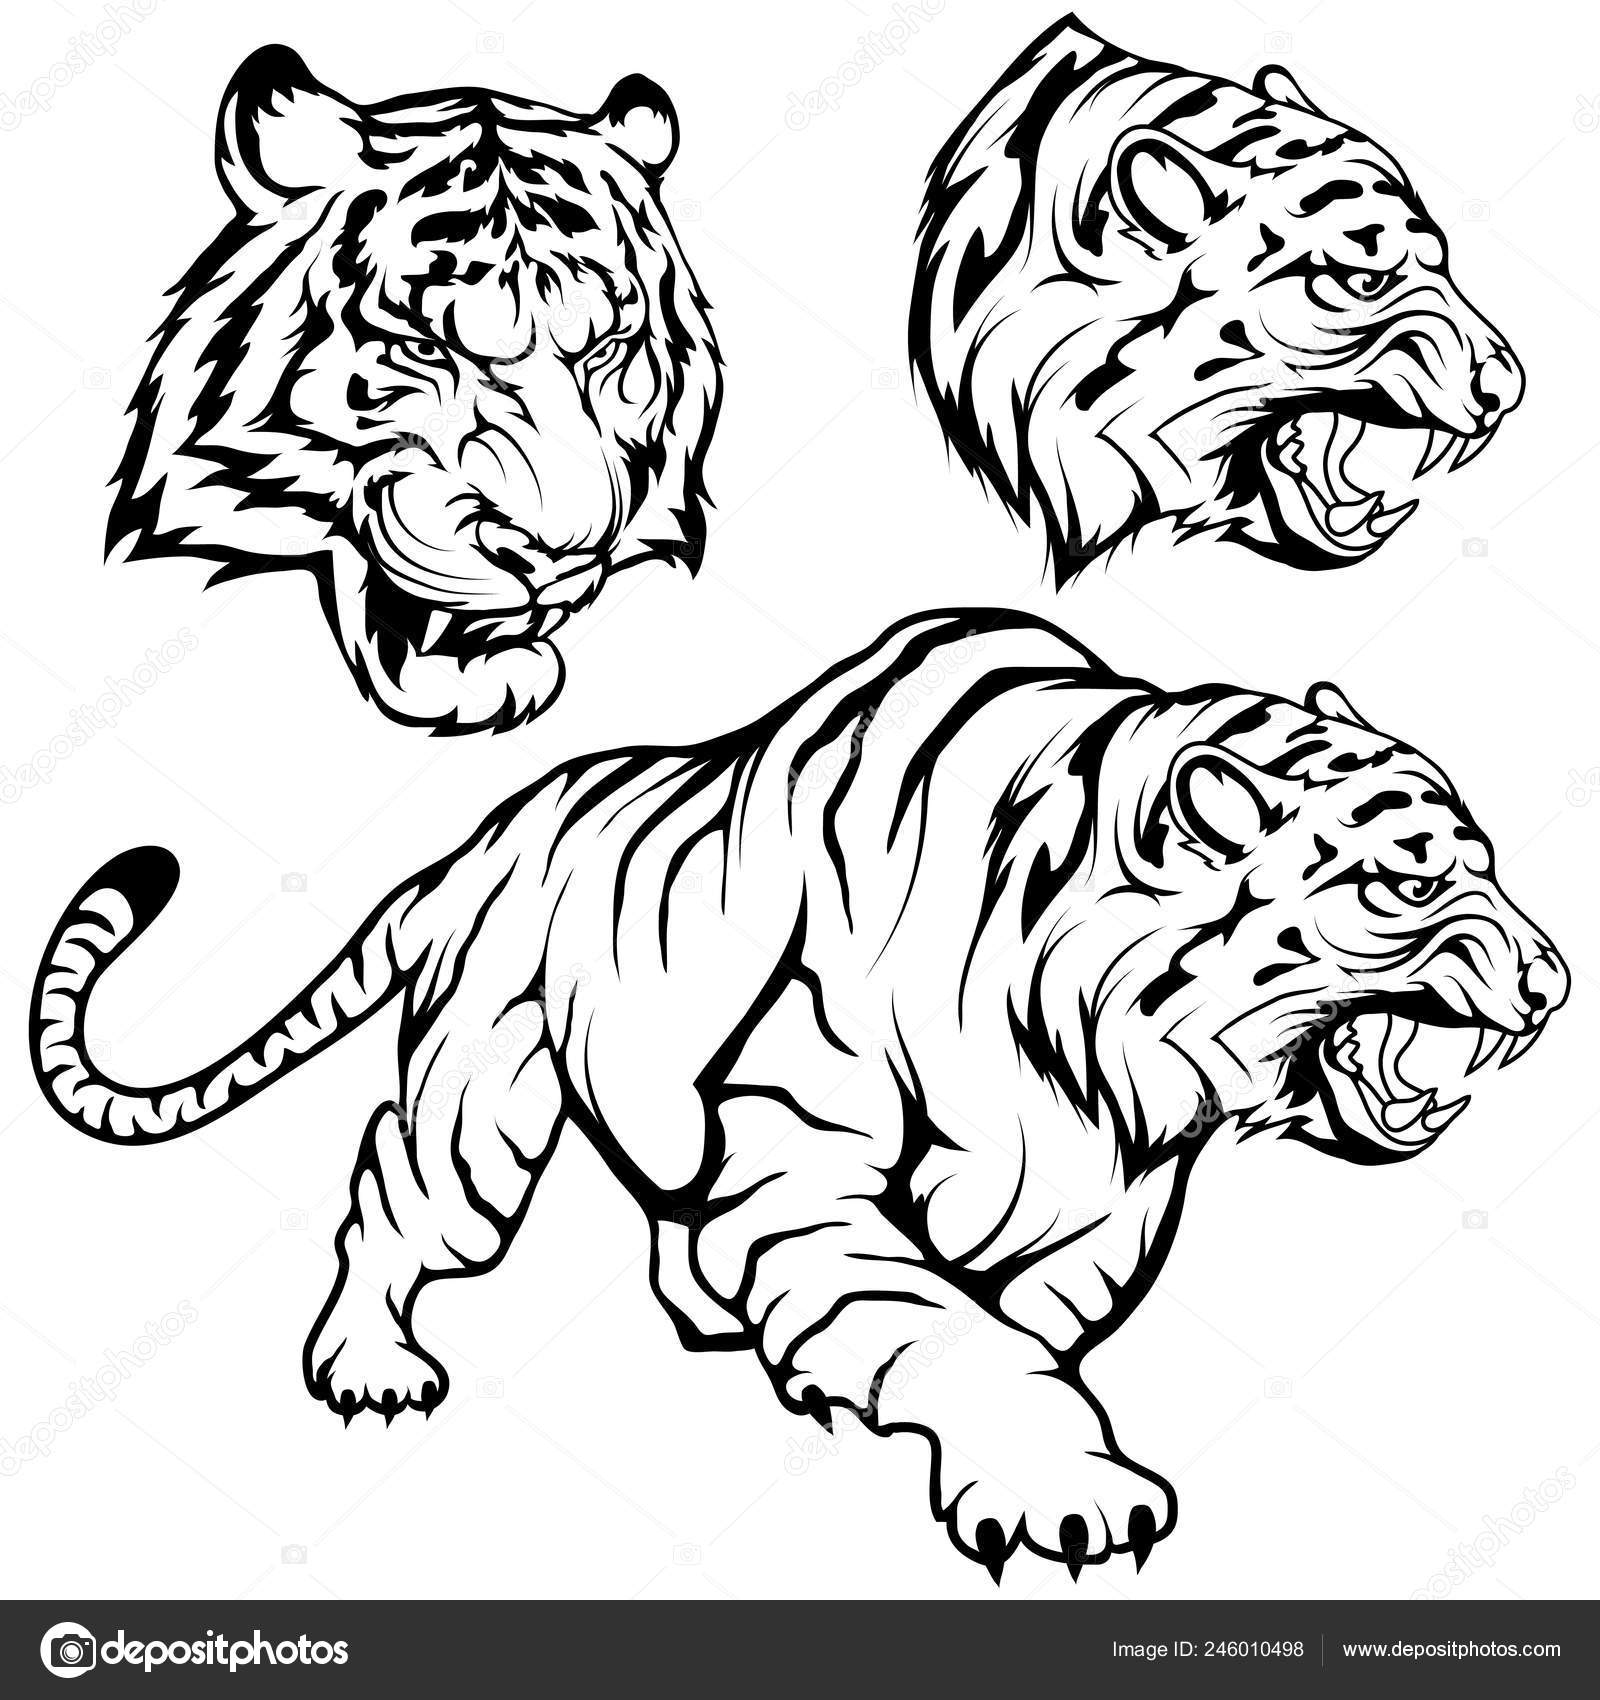 Black And White Illustration Of A Portrait Of A Tiger Stock Illustration   Download Image Now  iStock